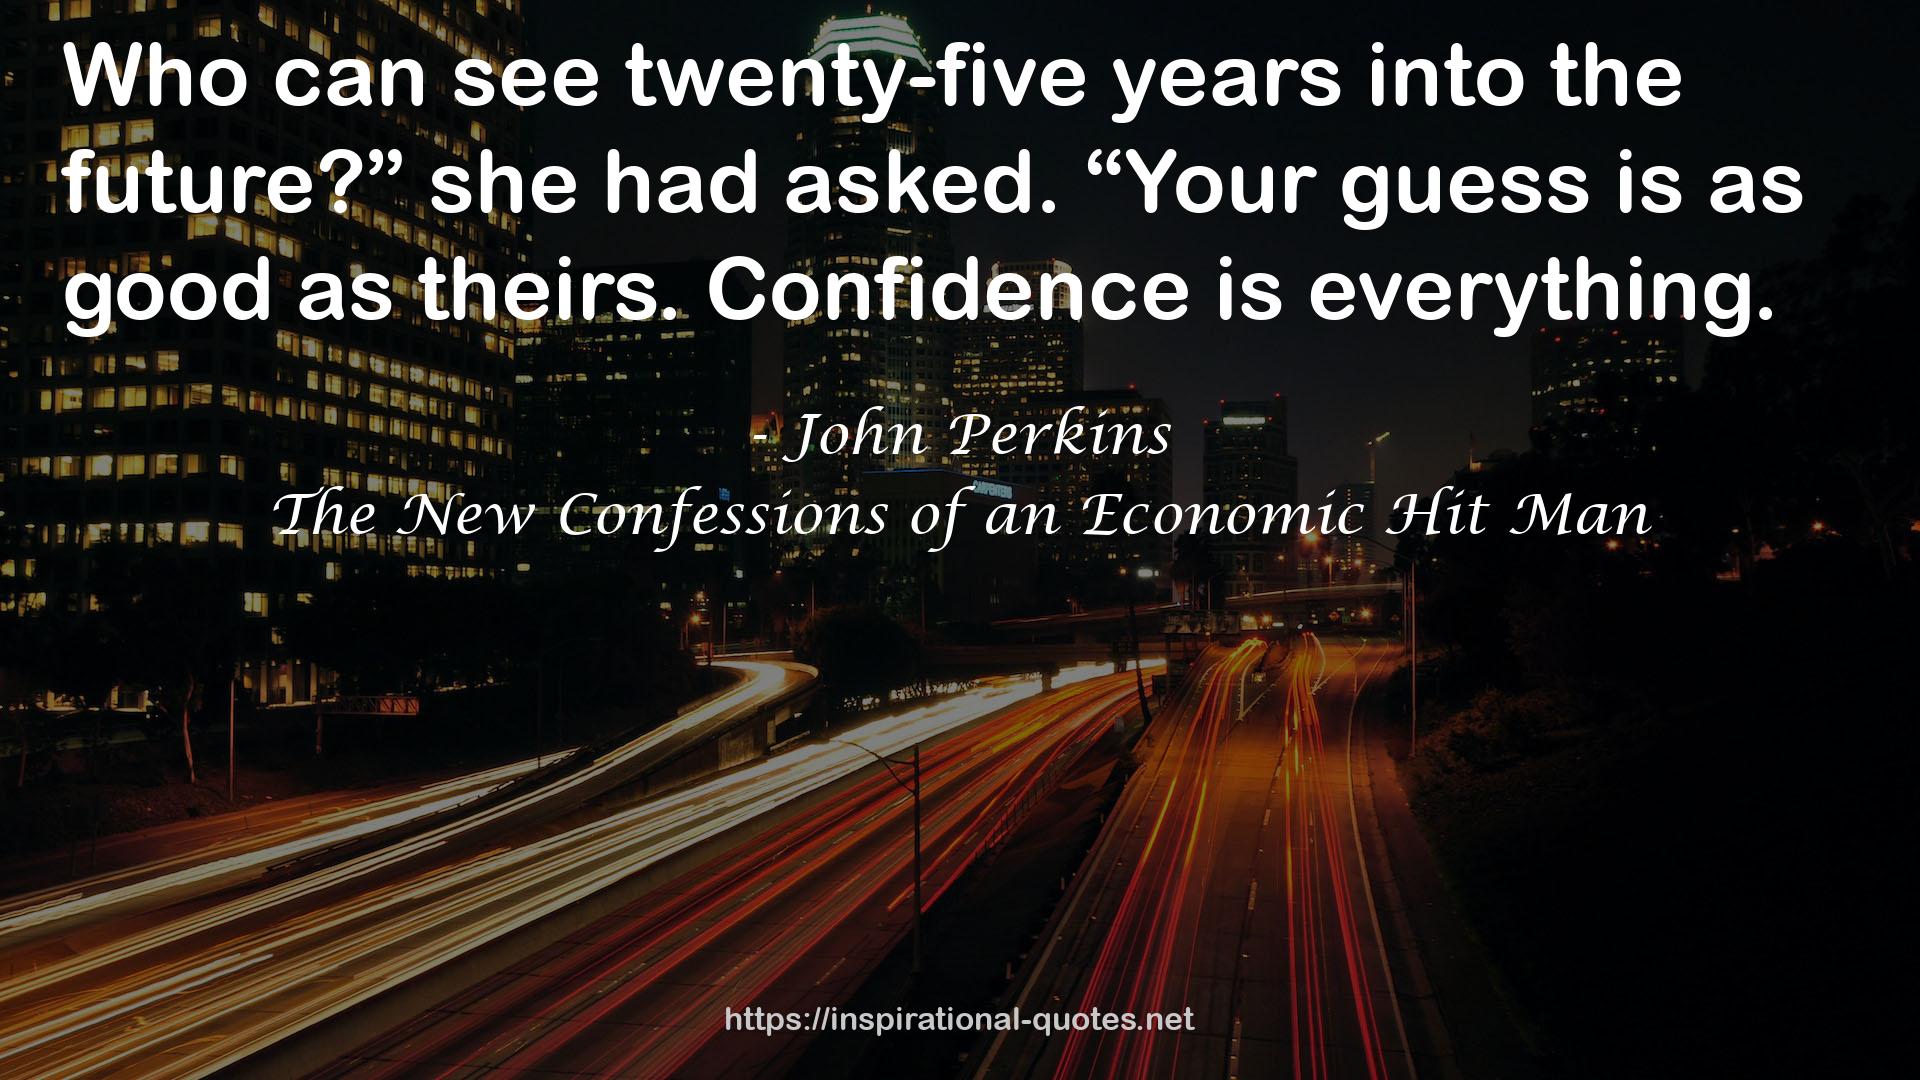 The New Confessions of an Economic Hit Man QUOTES